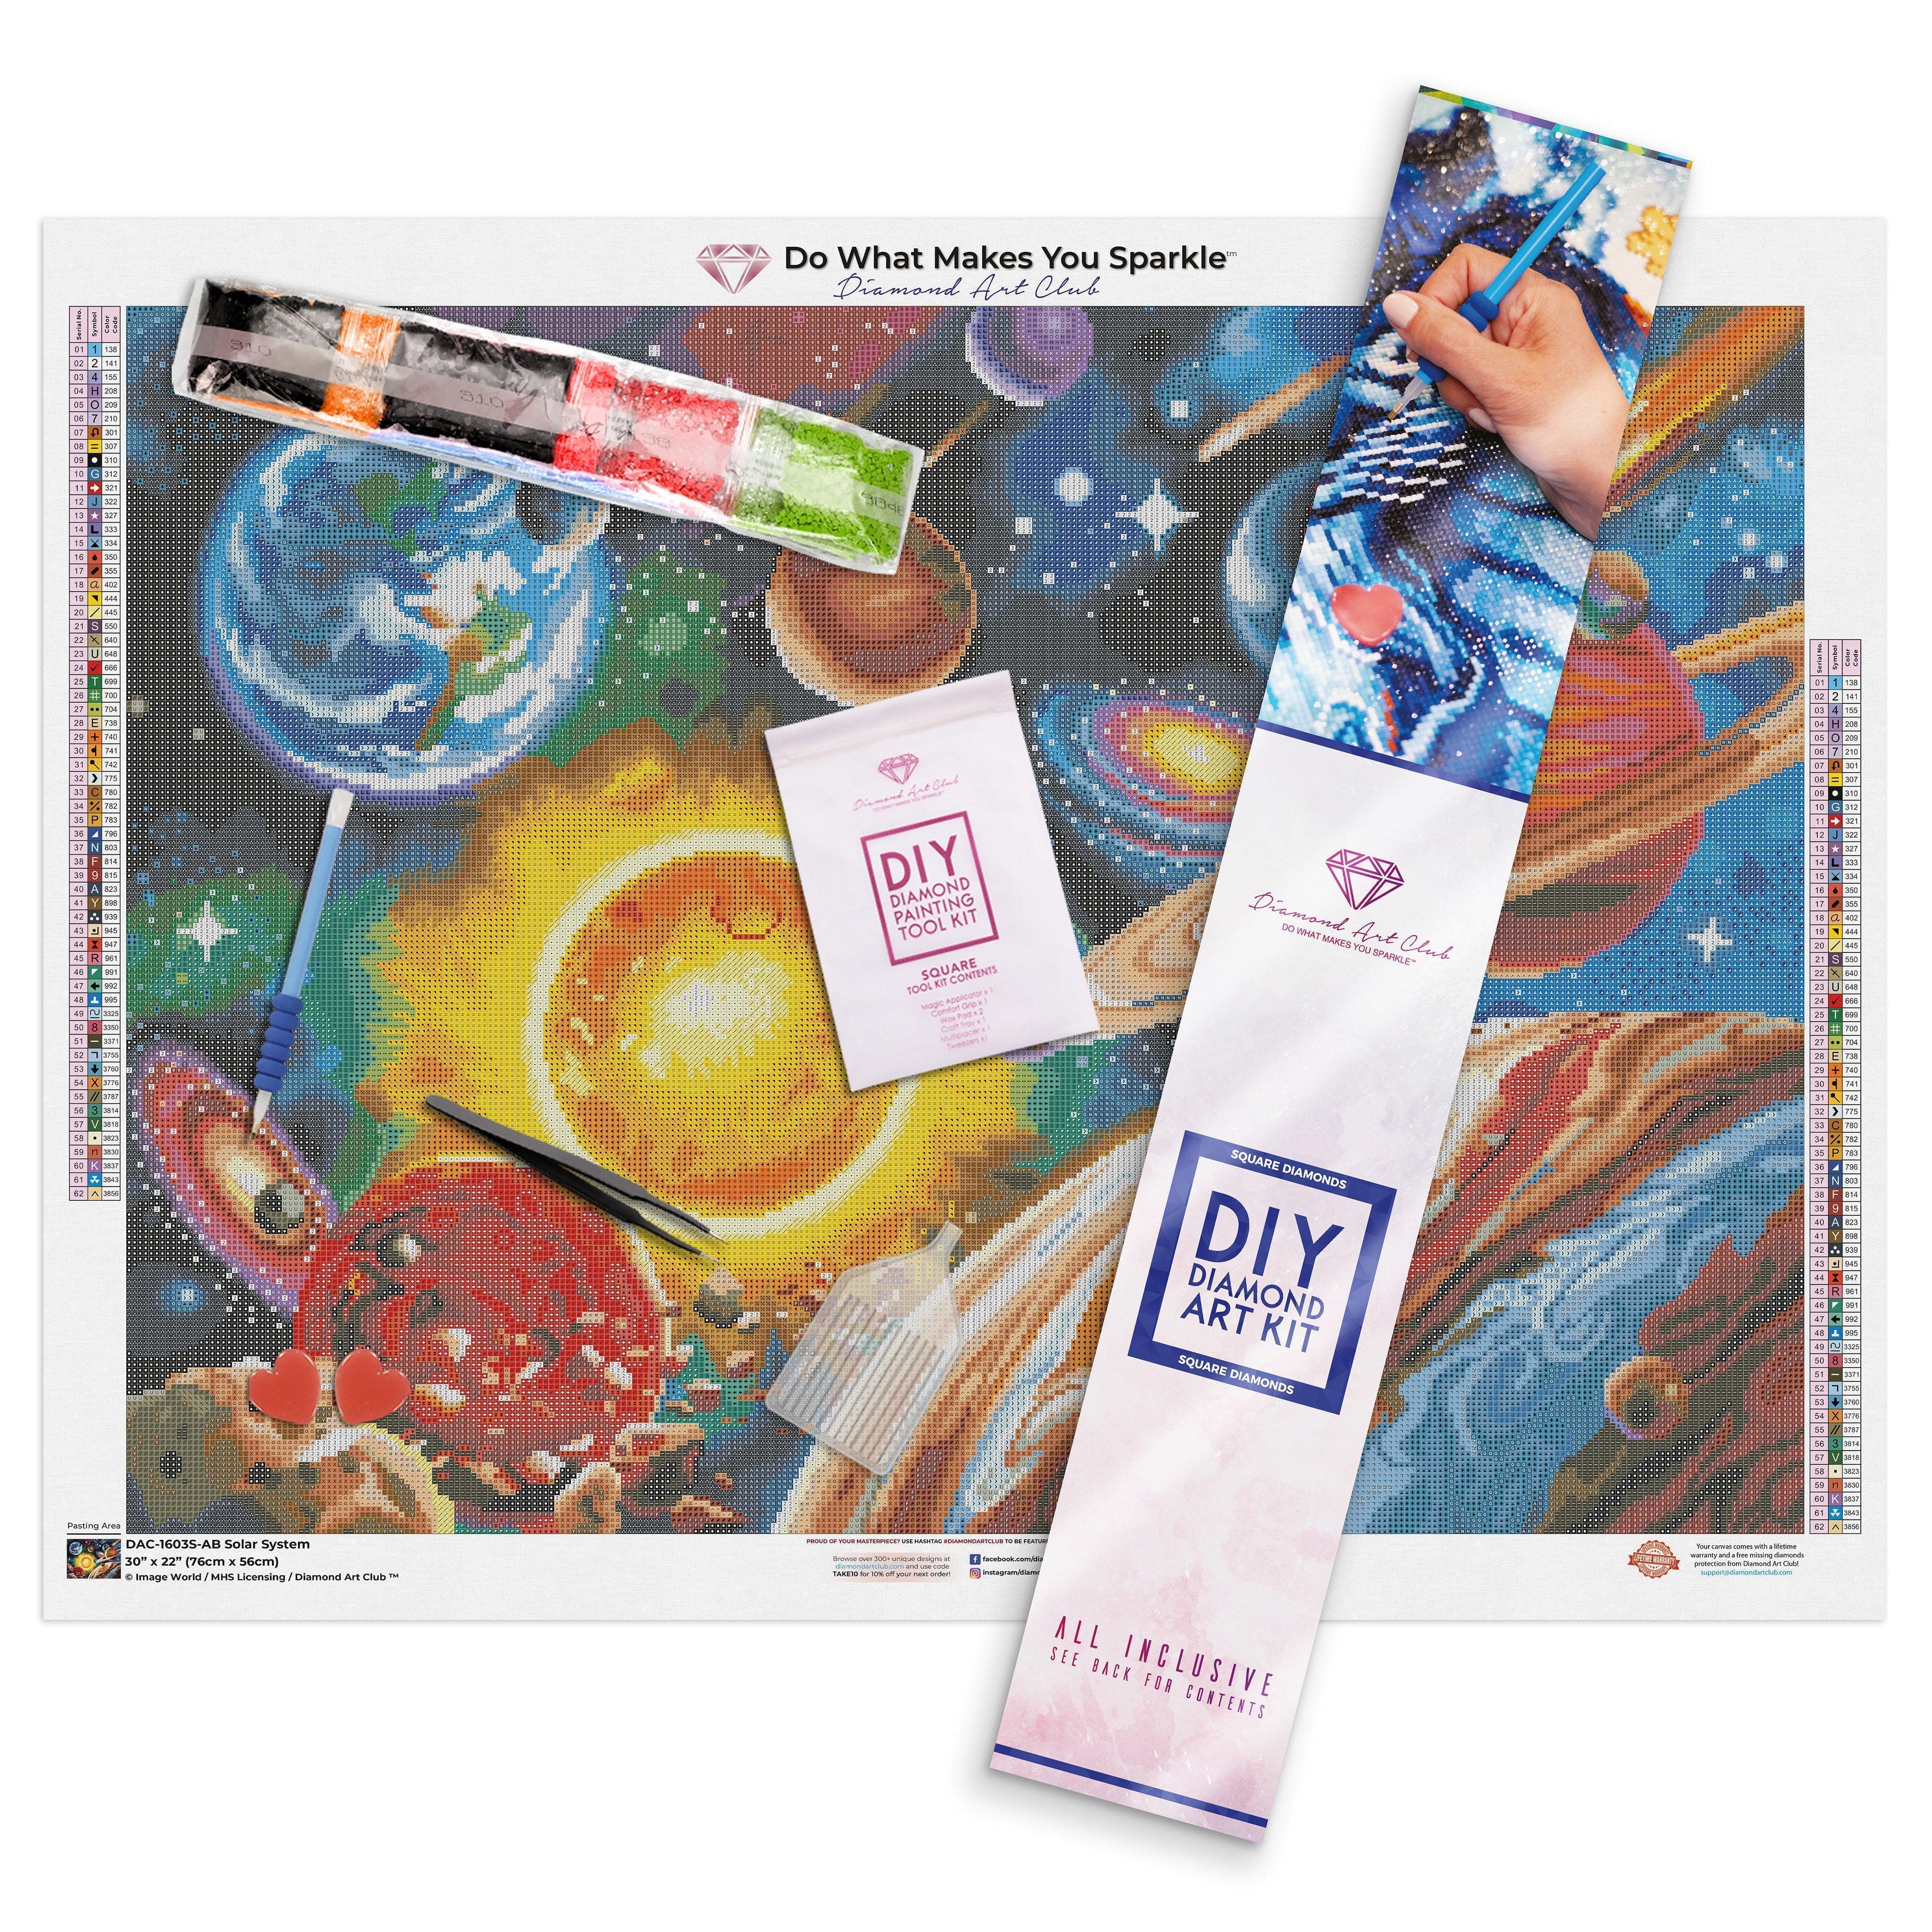 Diamond Painting Release Paper From Diamond Art Club, What Were